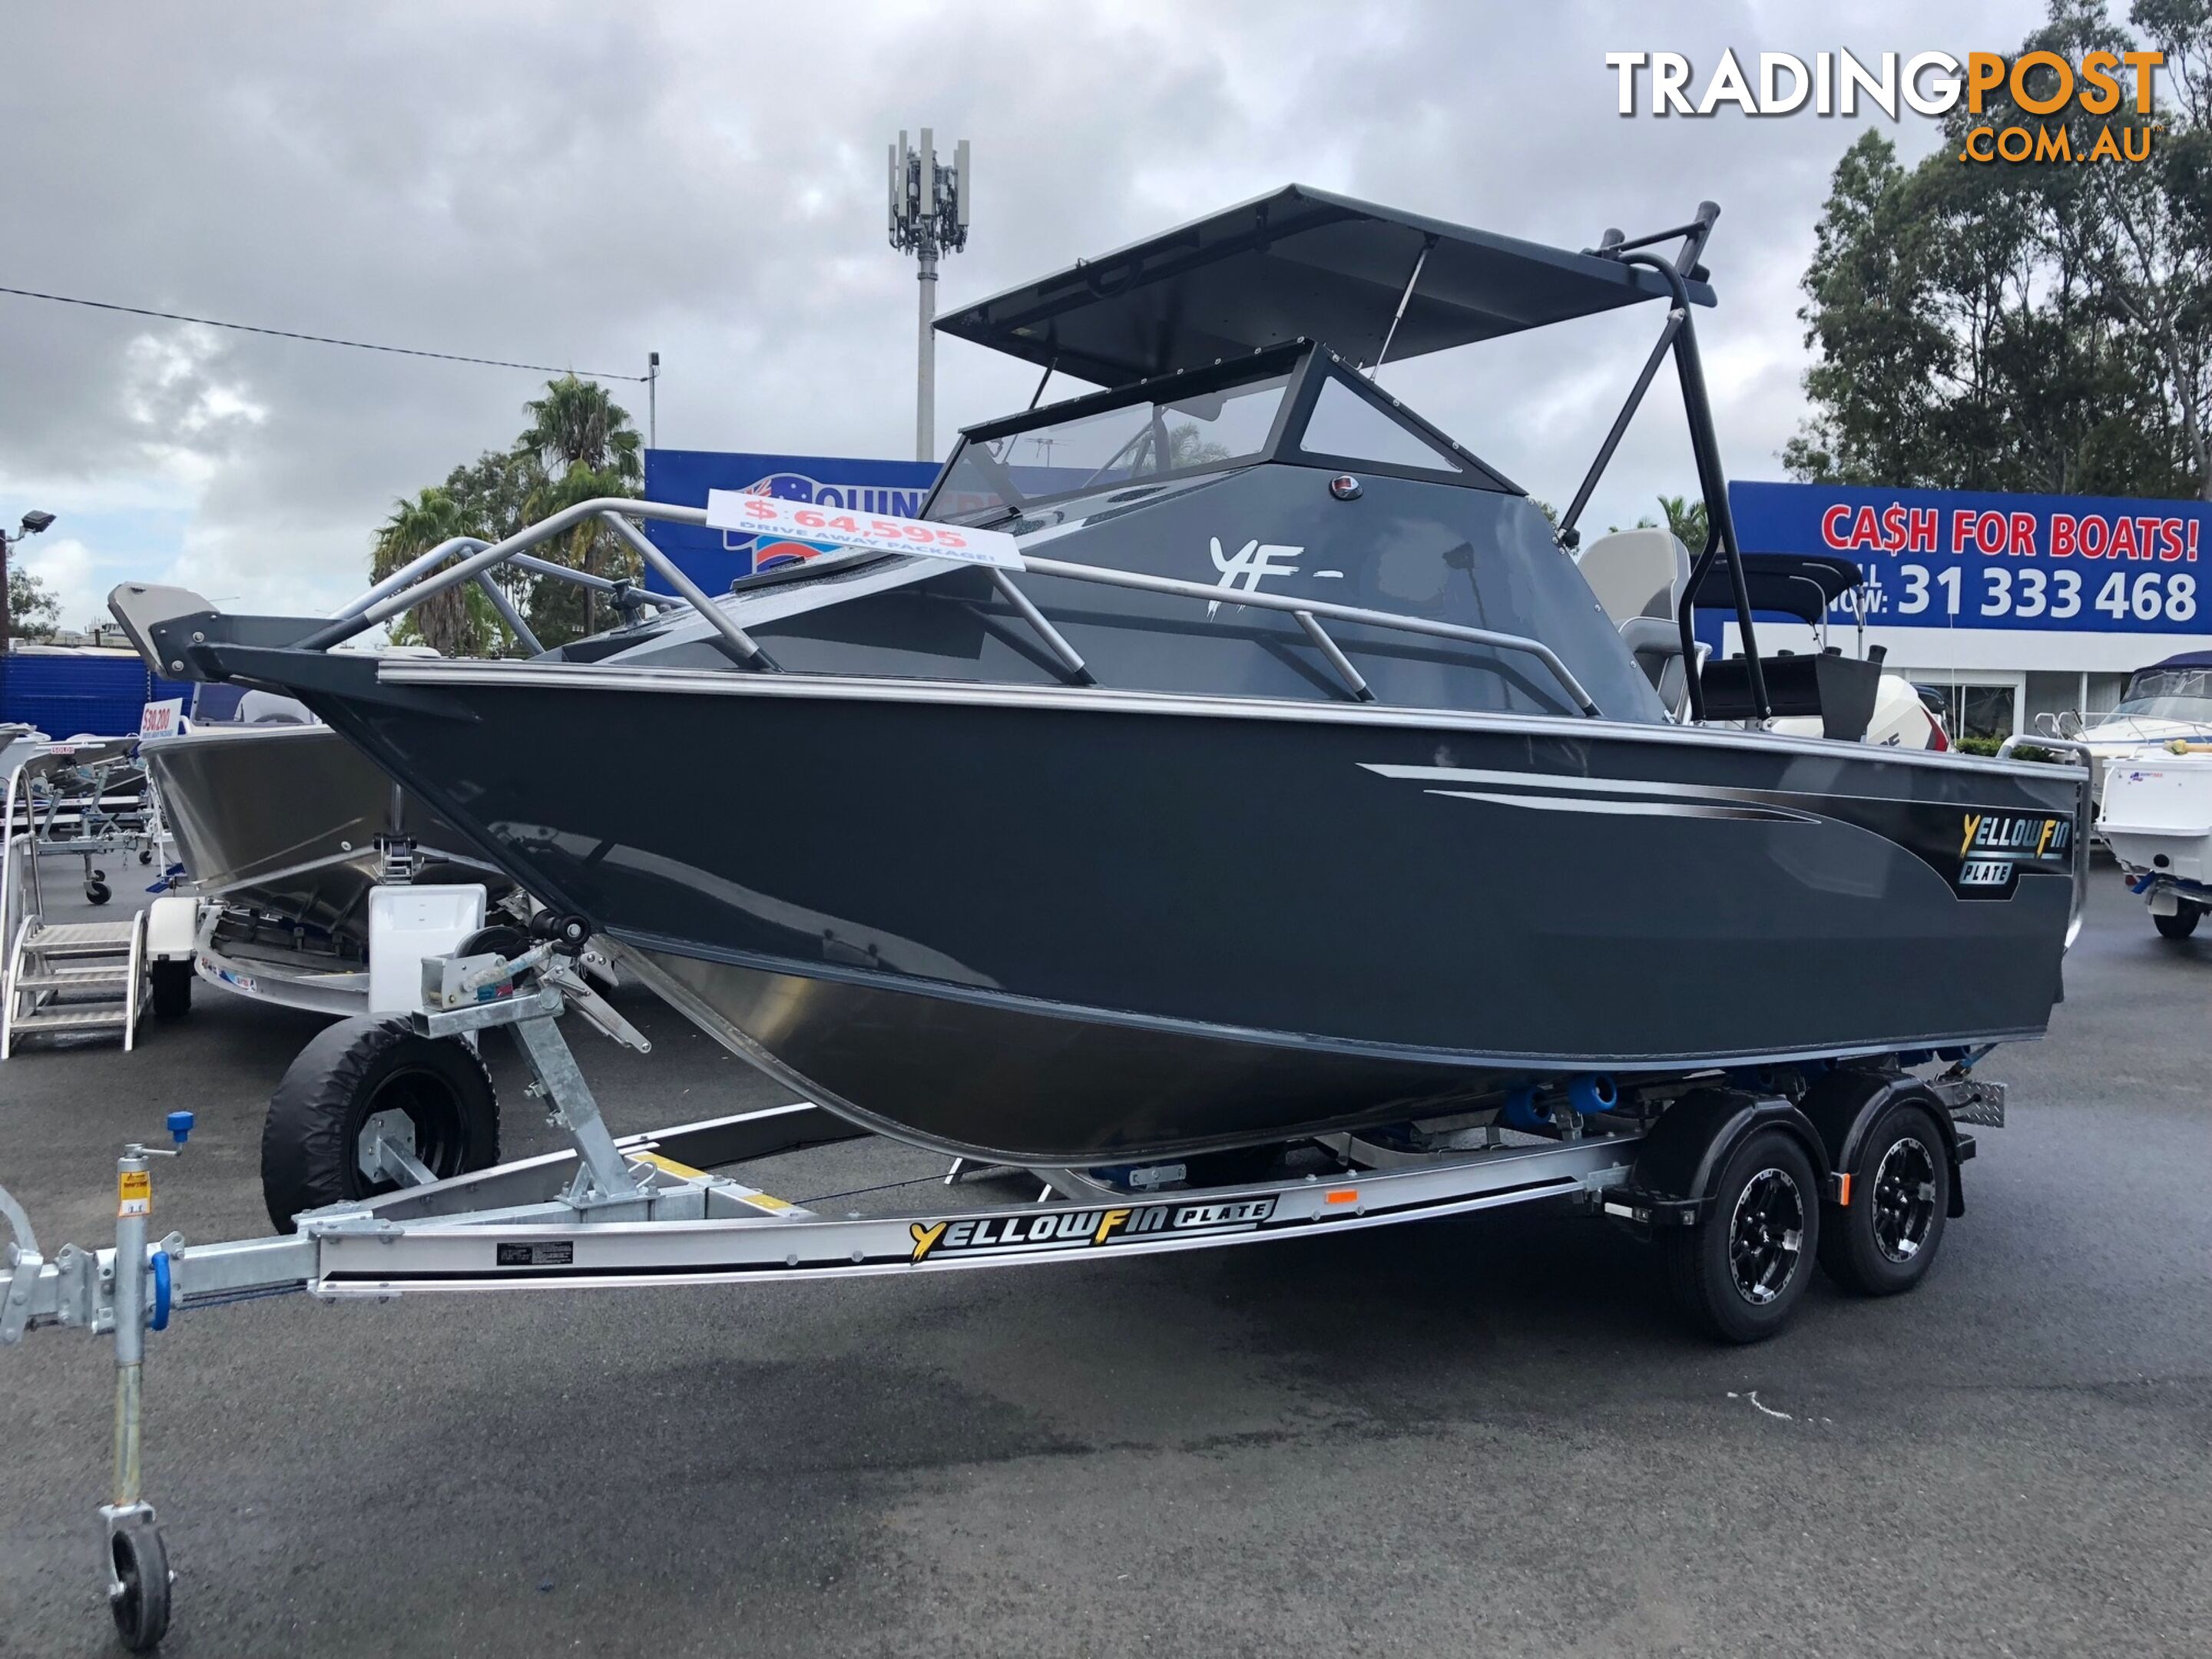 This New 5800 Yellowfin Folding Hard Top has most of what you would need our Pack 4